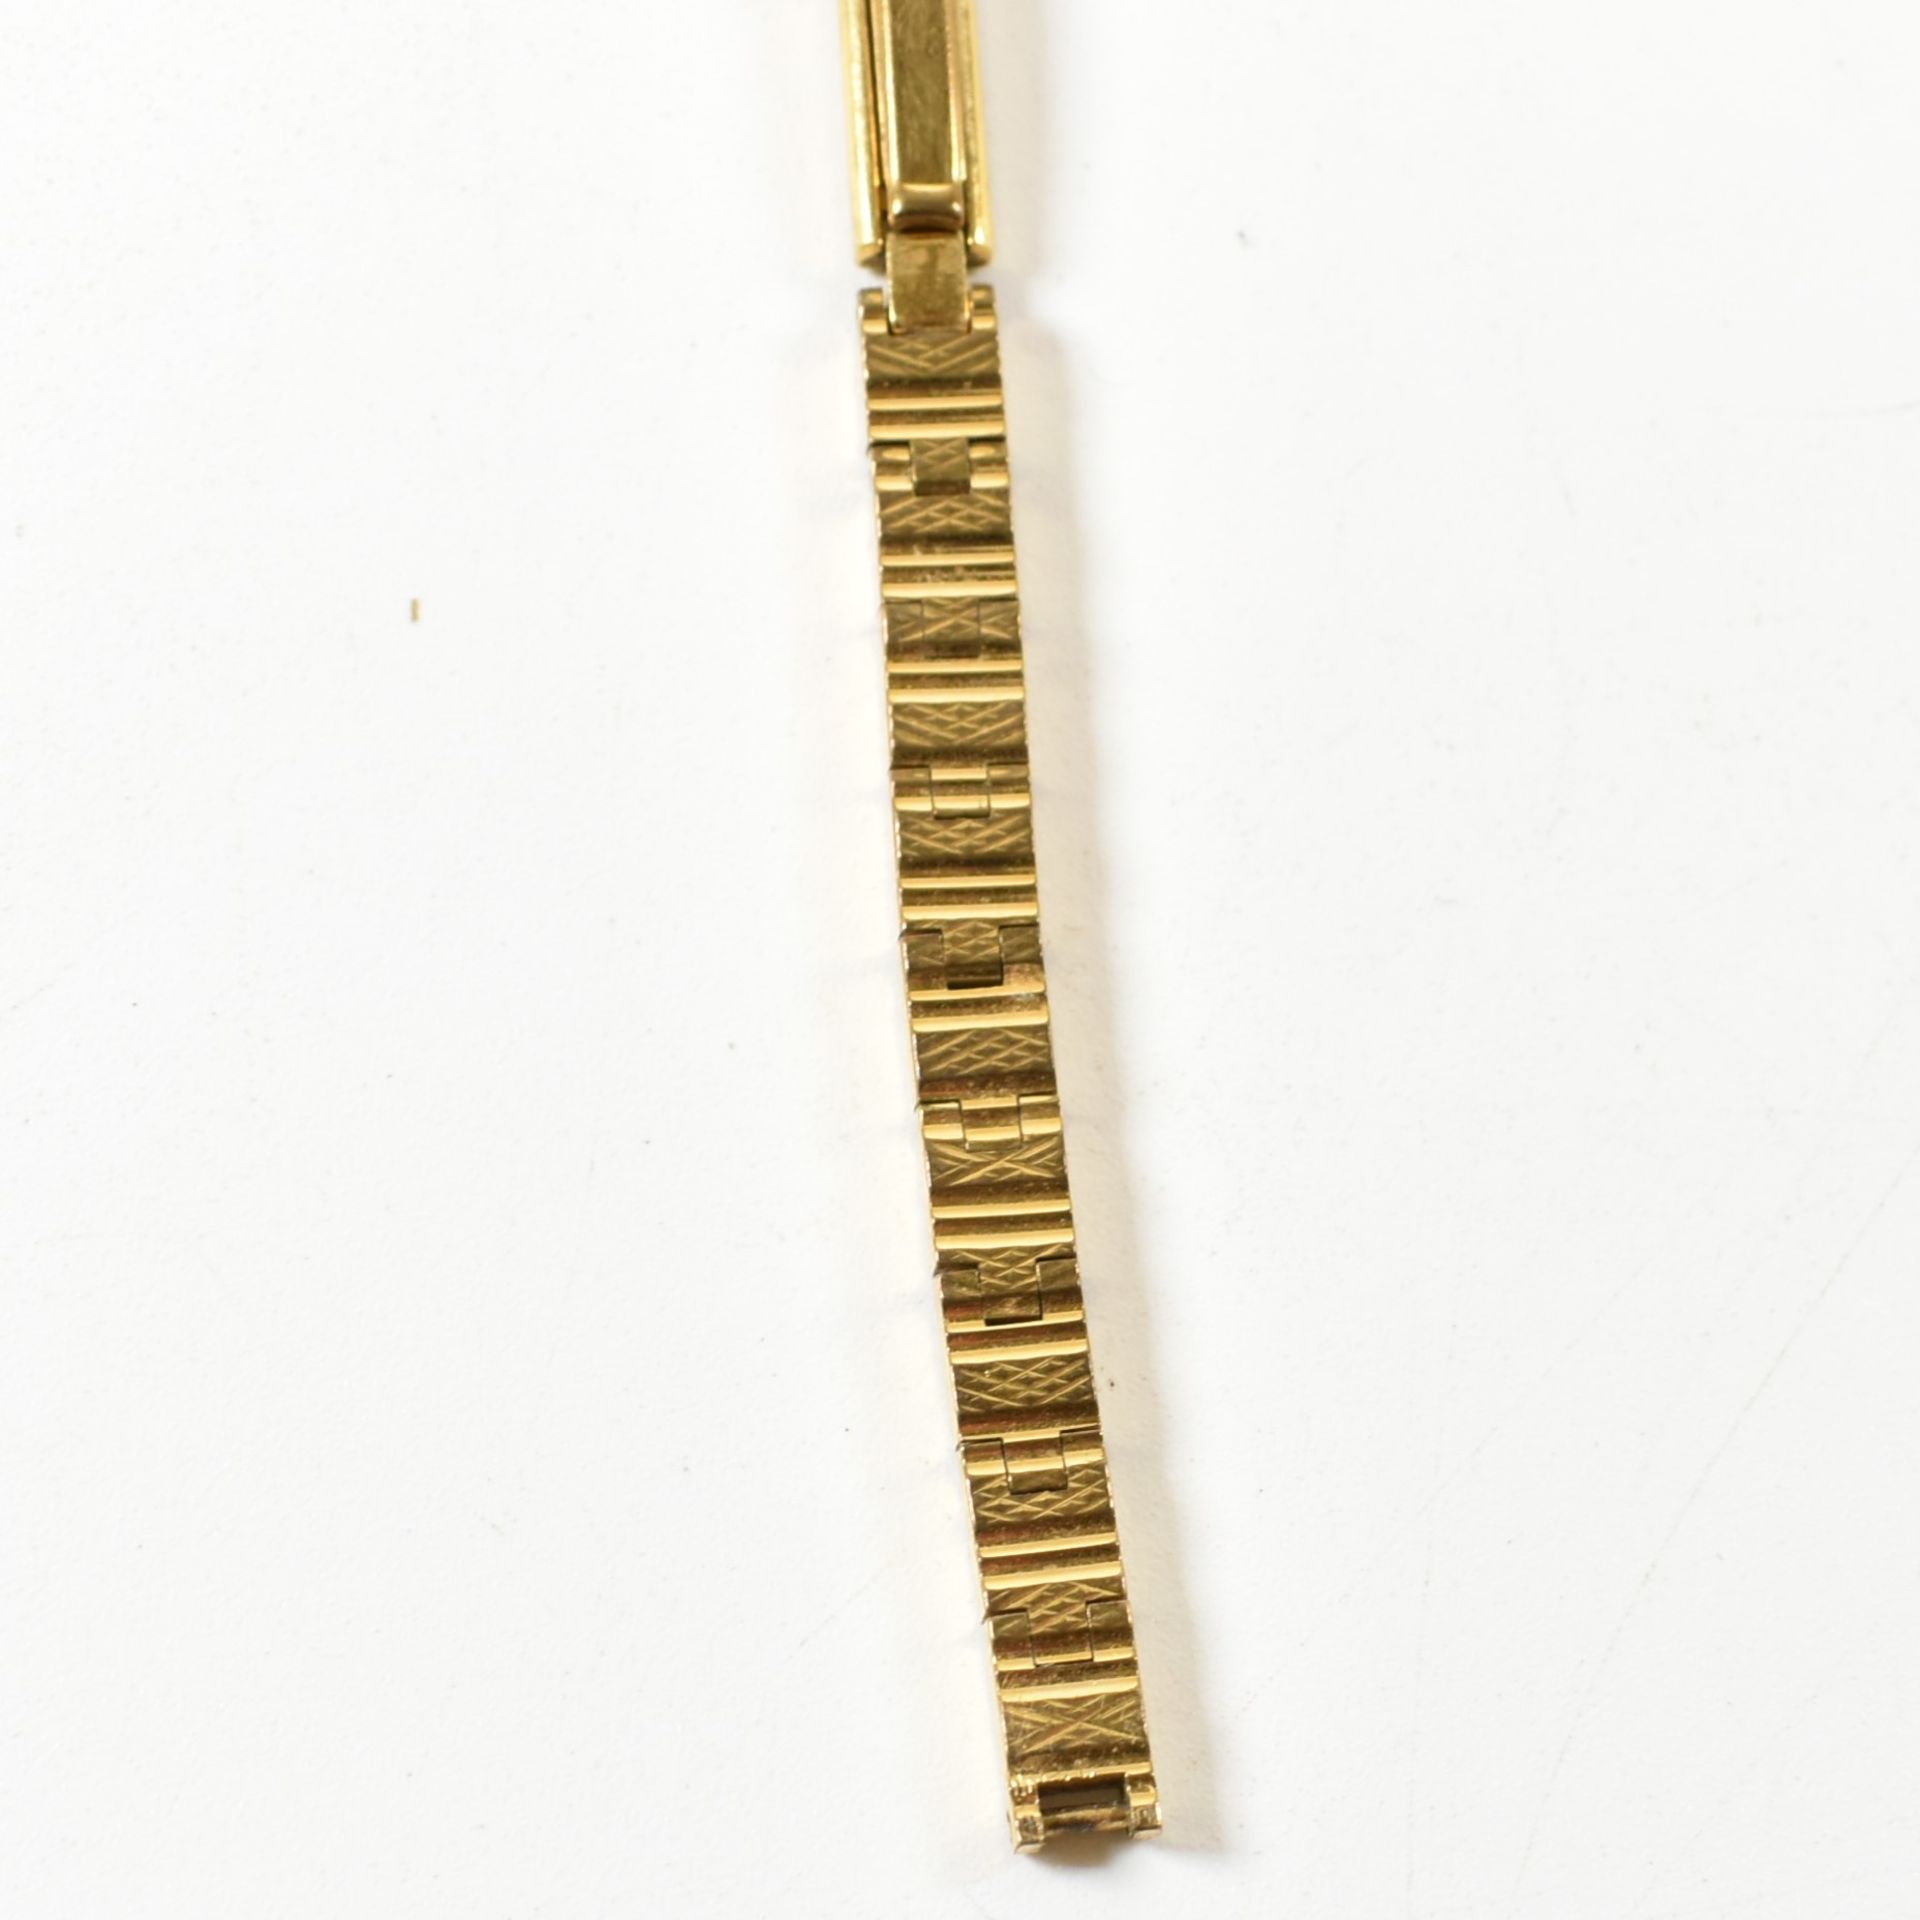 HALLMARKED 9CT GOLD OMEGA WATCH ON GILDED STRAP - Image 4 of 5